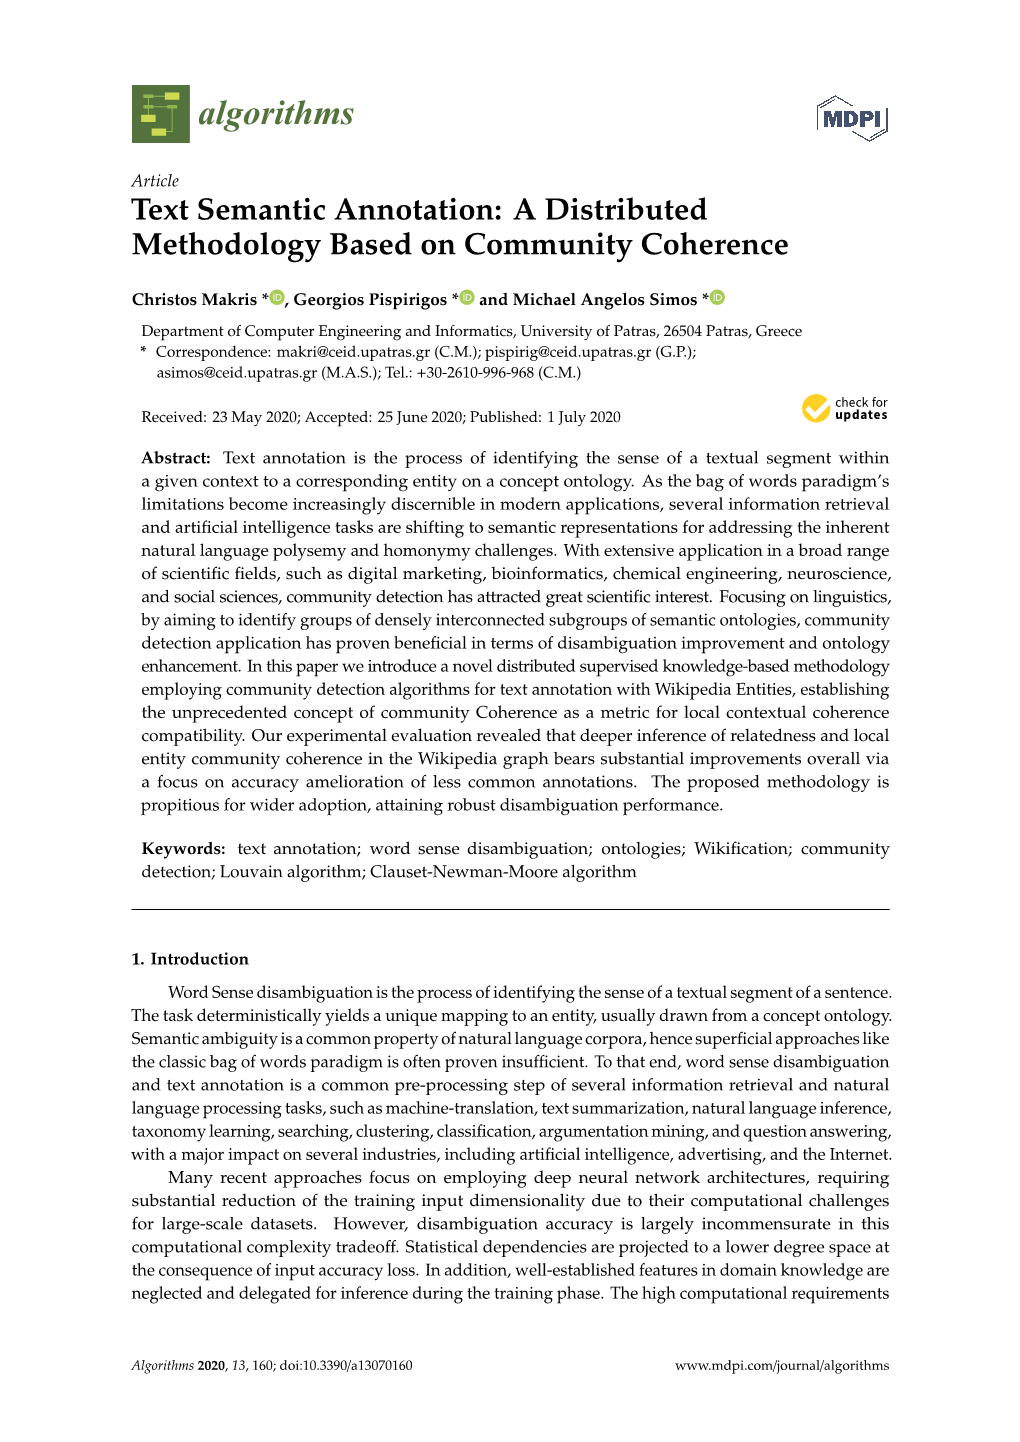 Text Semantic Annotation: a Distributed Methodology Based on Community Coherence